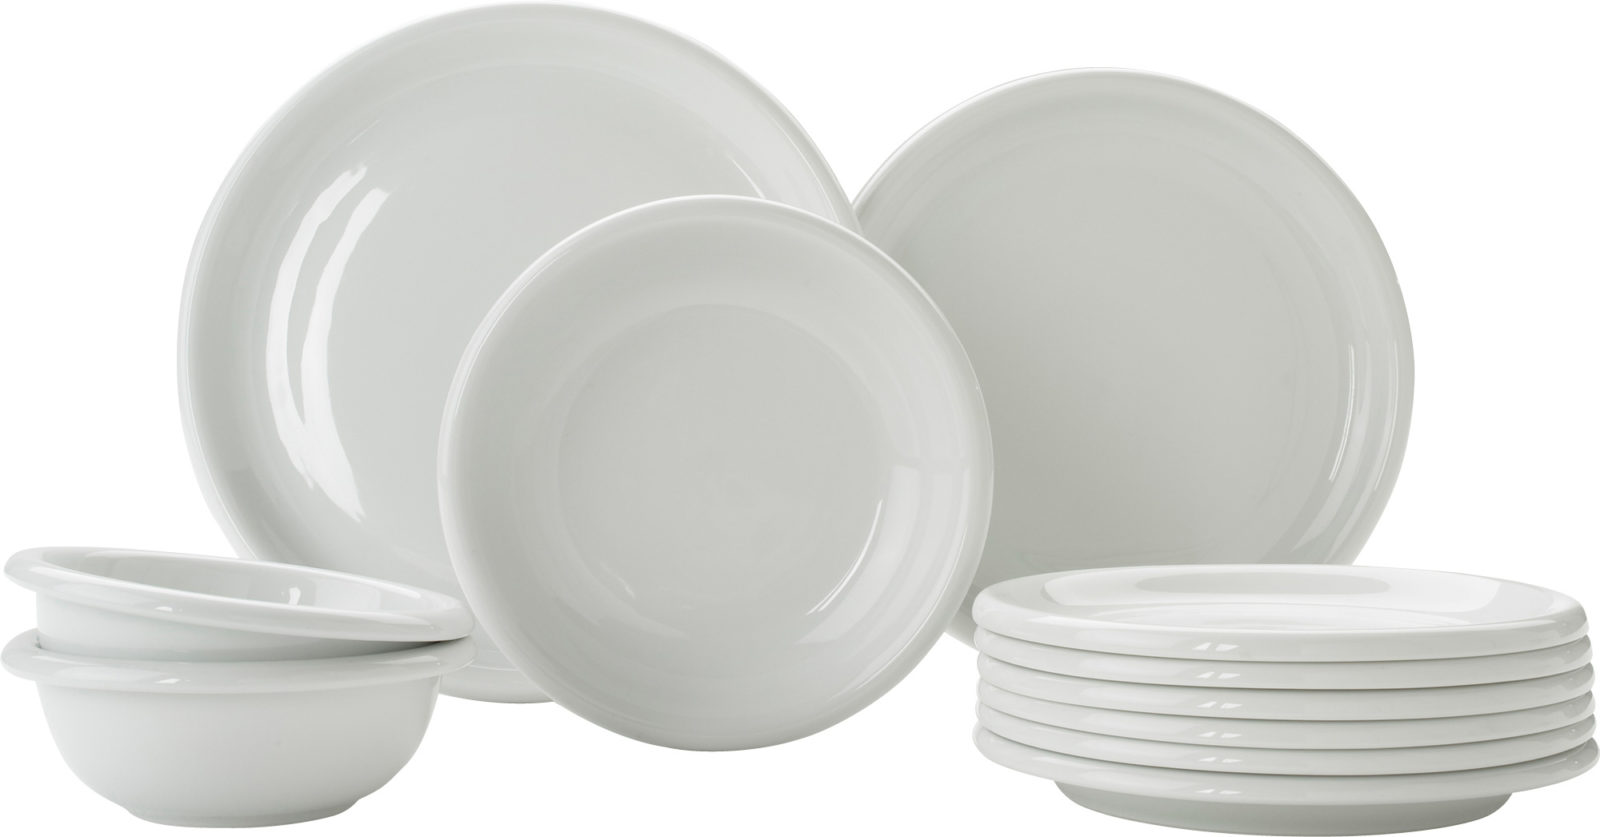 Simple white tableware, plates and bowls, RONDO.